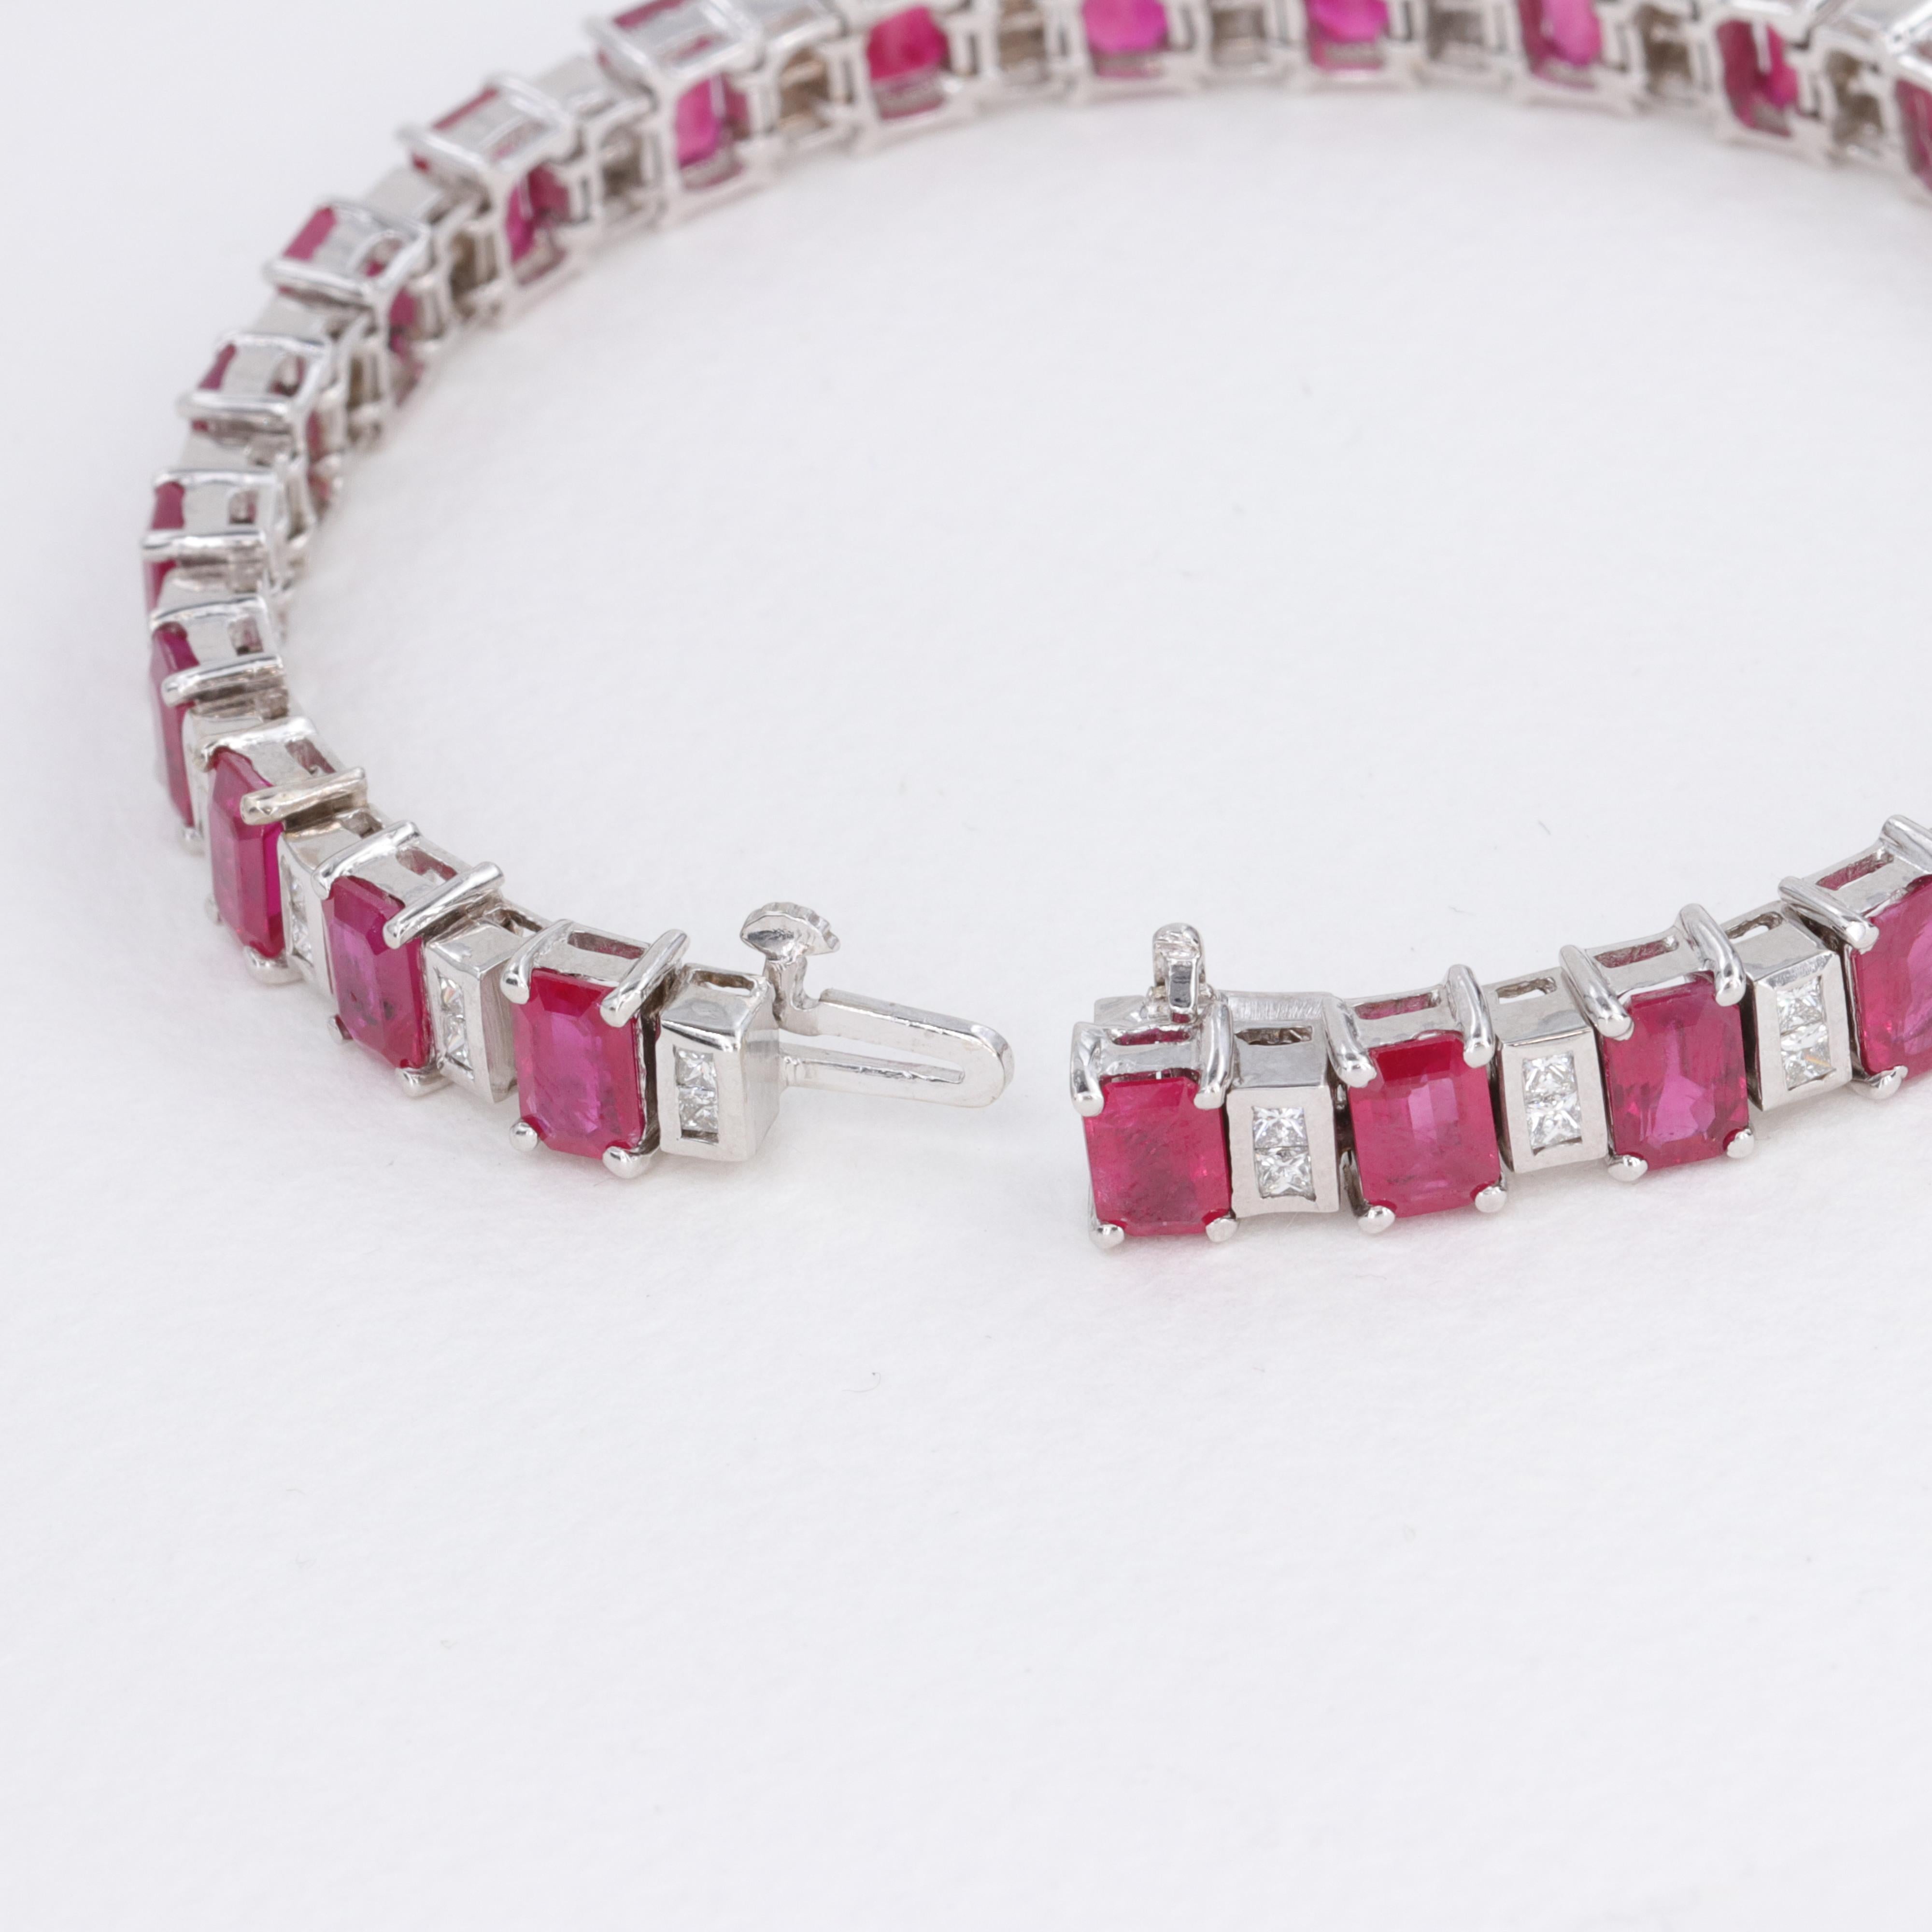 22 Carat Ruby and Diamond Tennis Bracelet In Excellent Condition For Sale In Tampa, FL